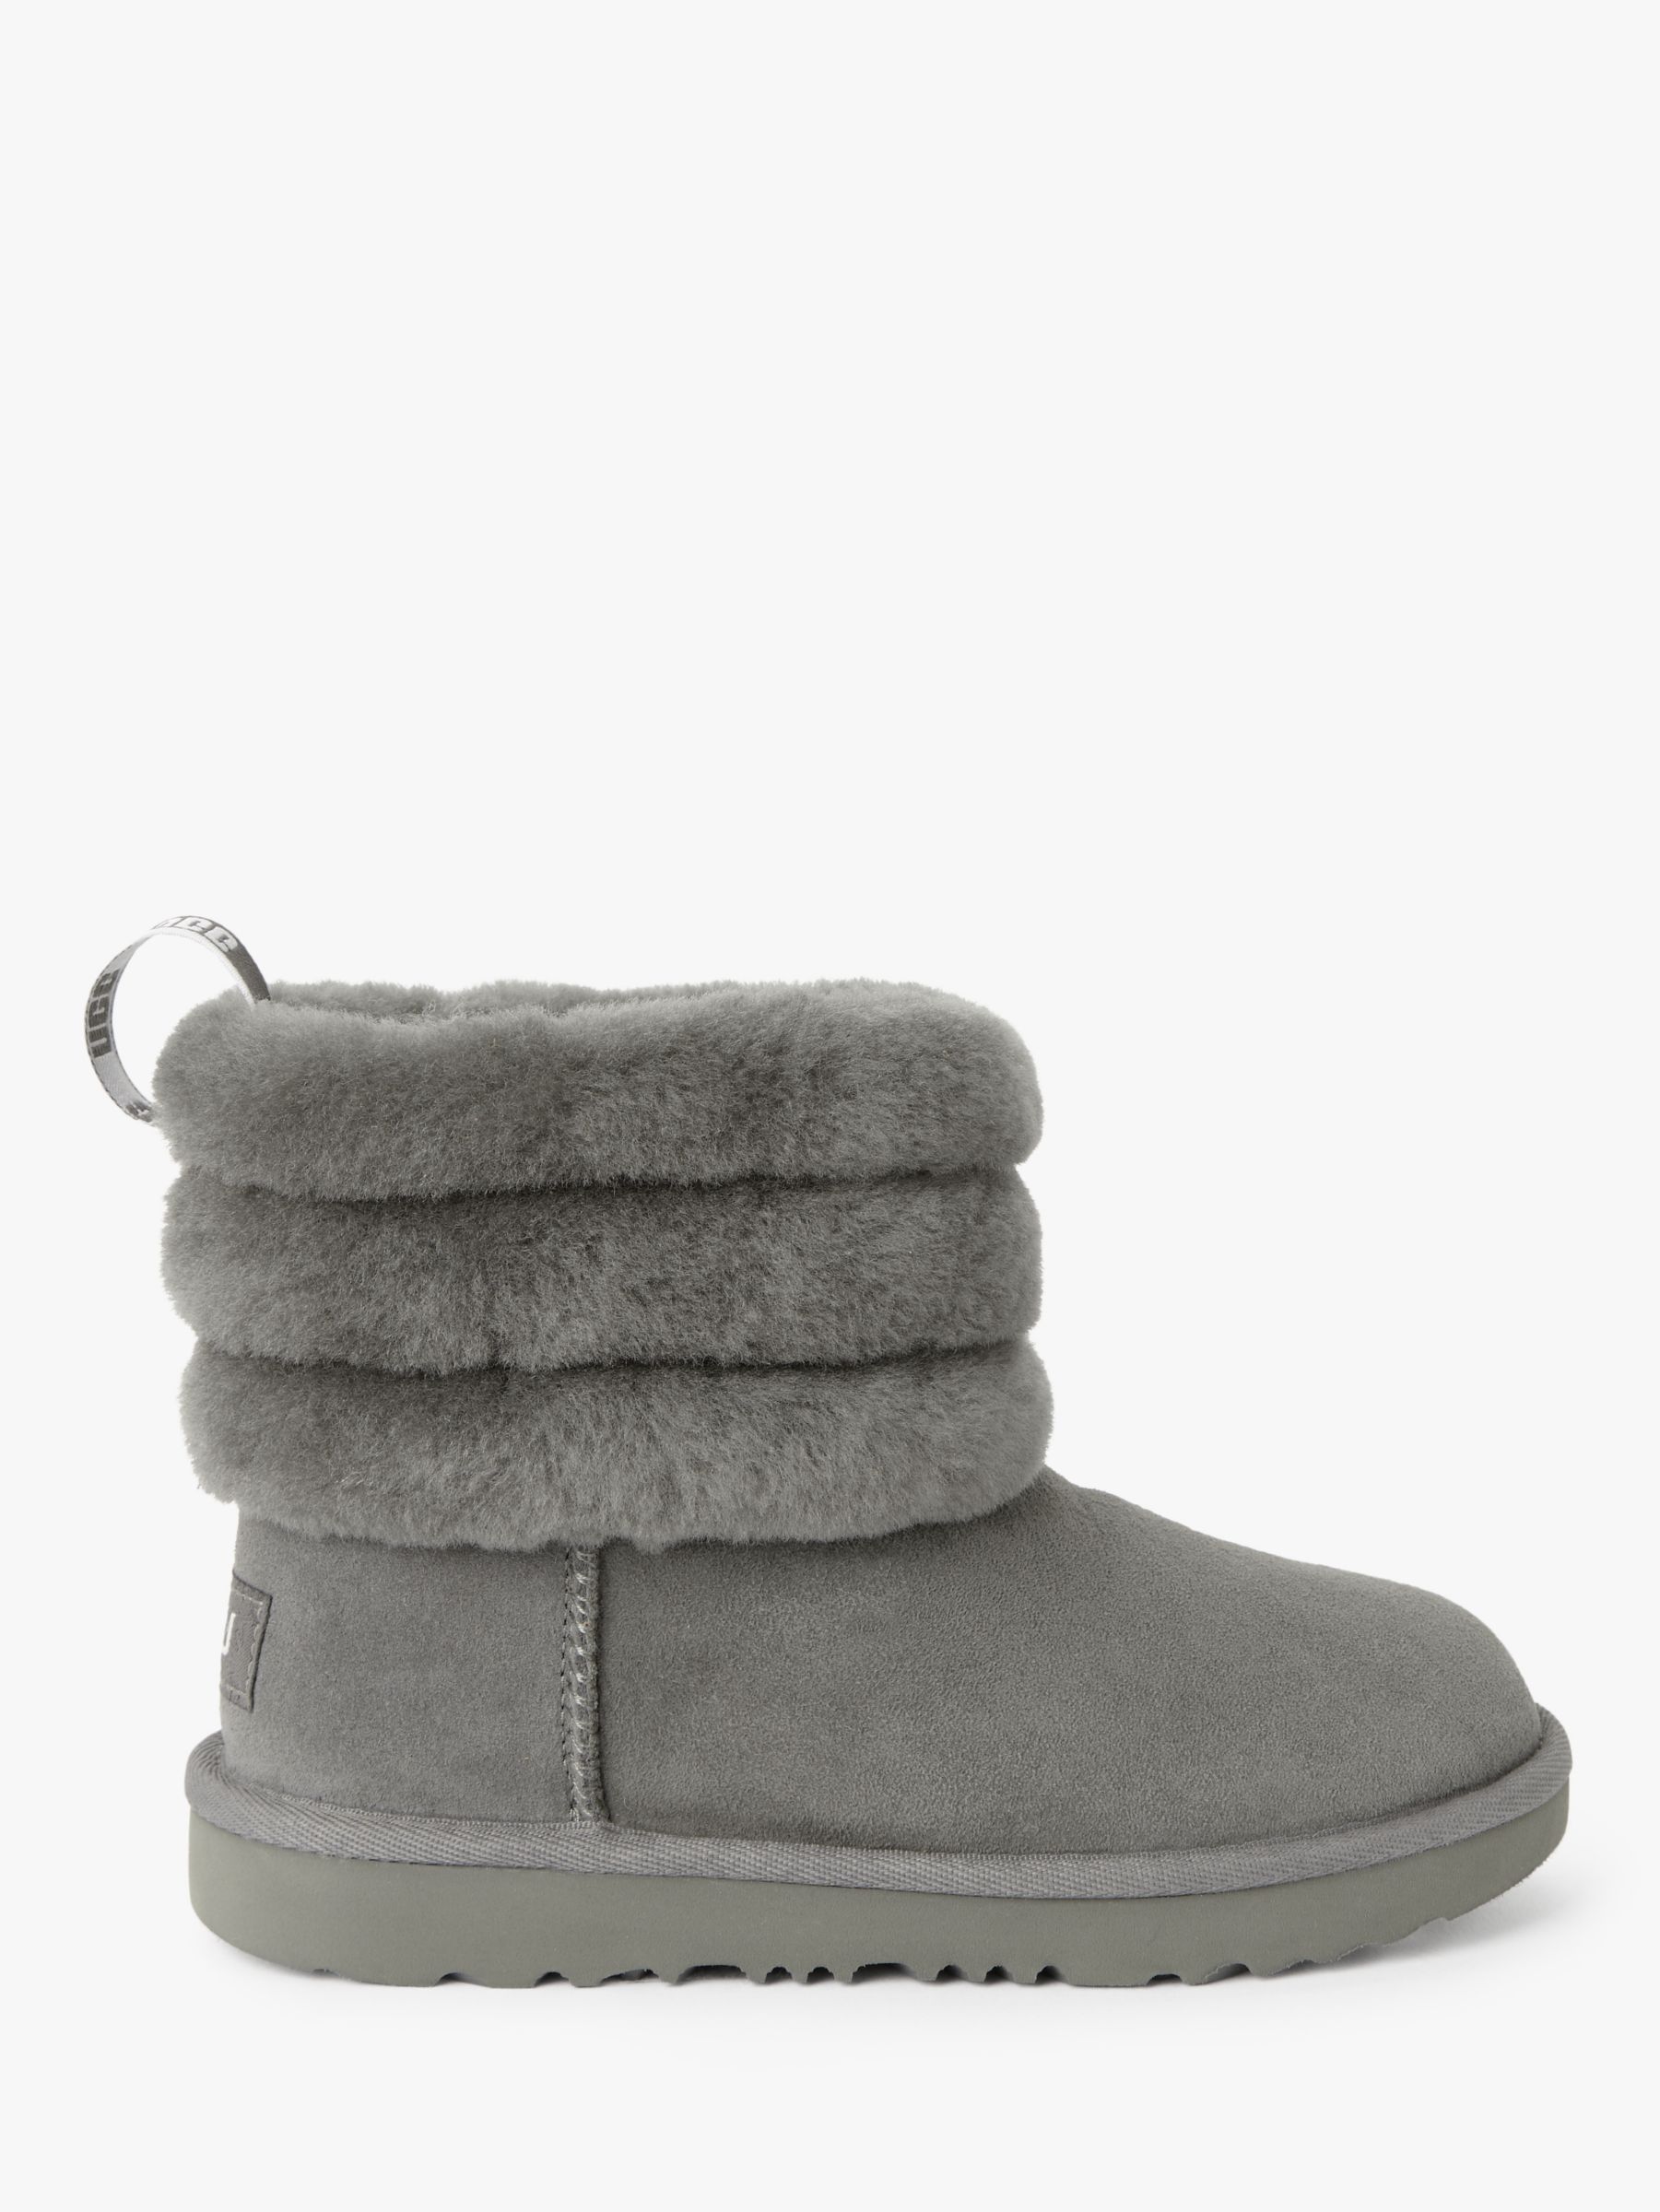 ugg boots with fluff